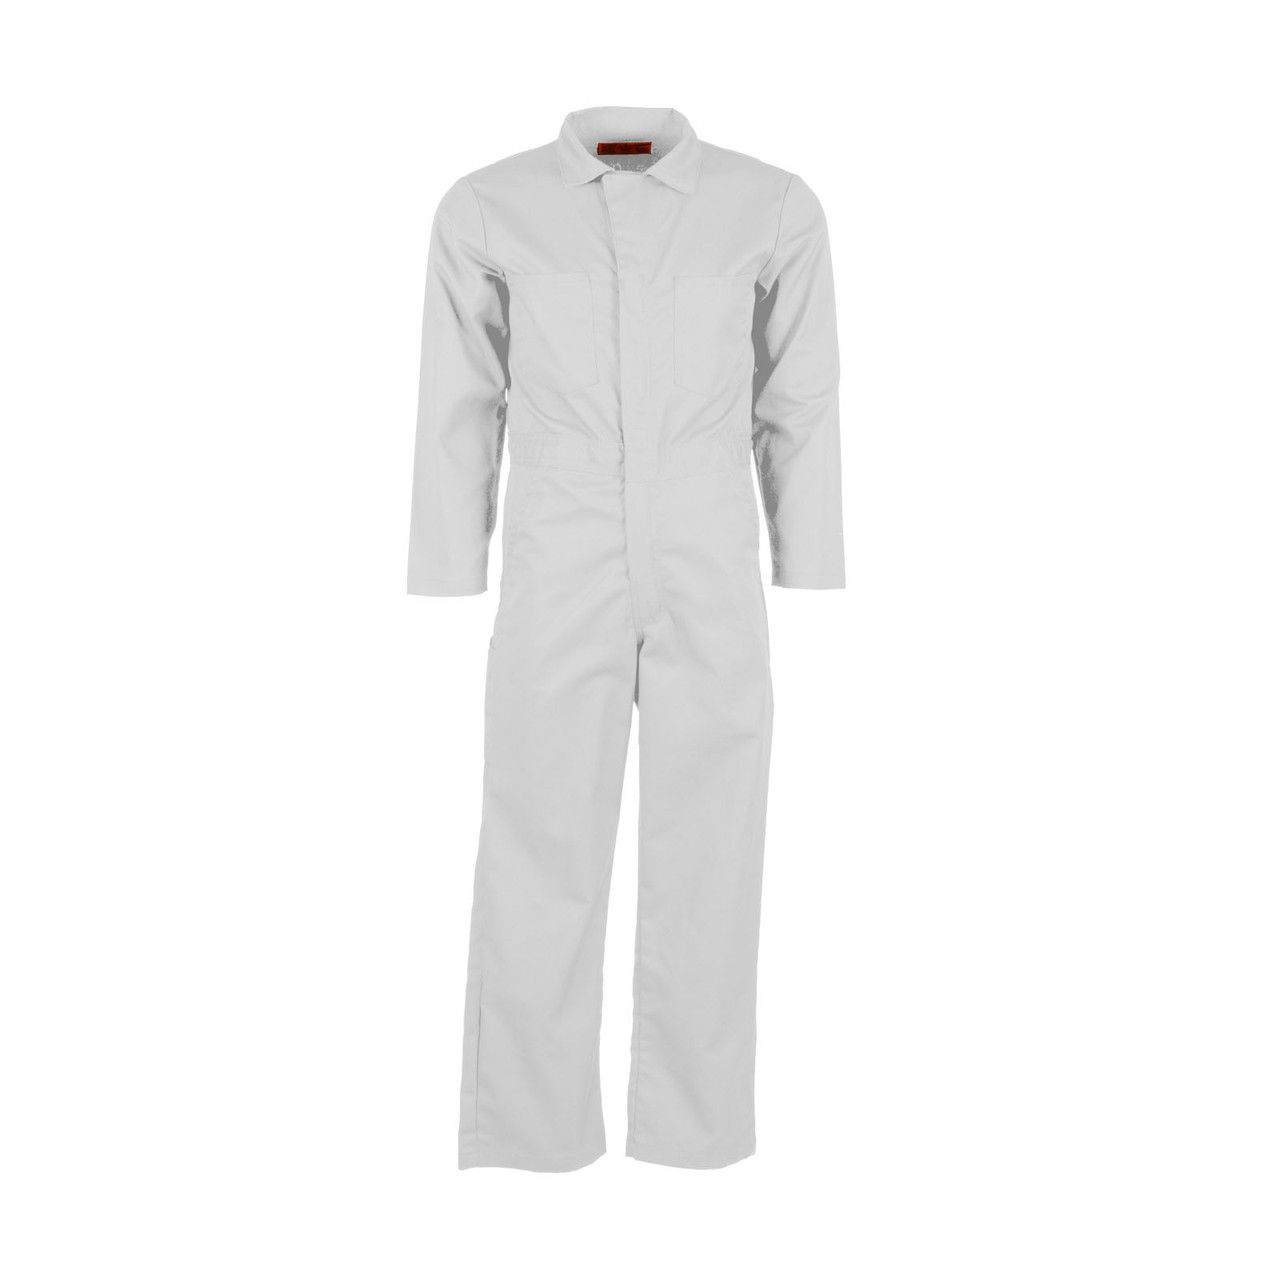 What are the features of the CV10WH white coveralls?